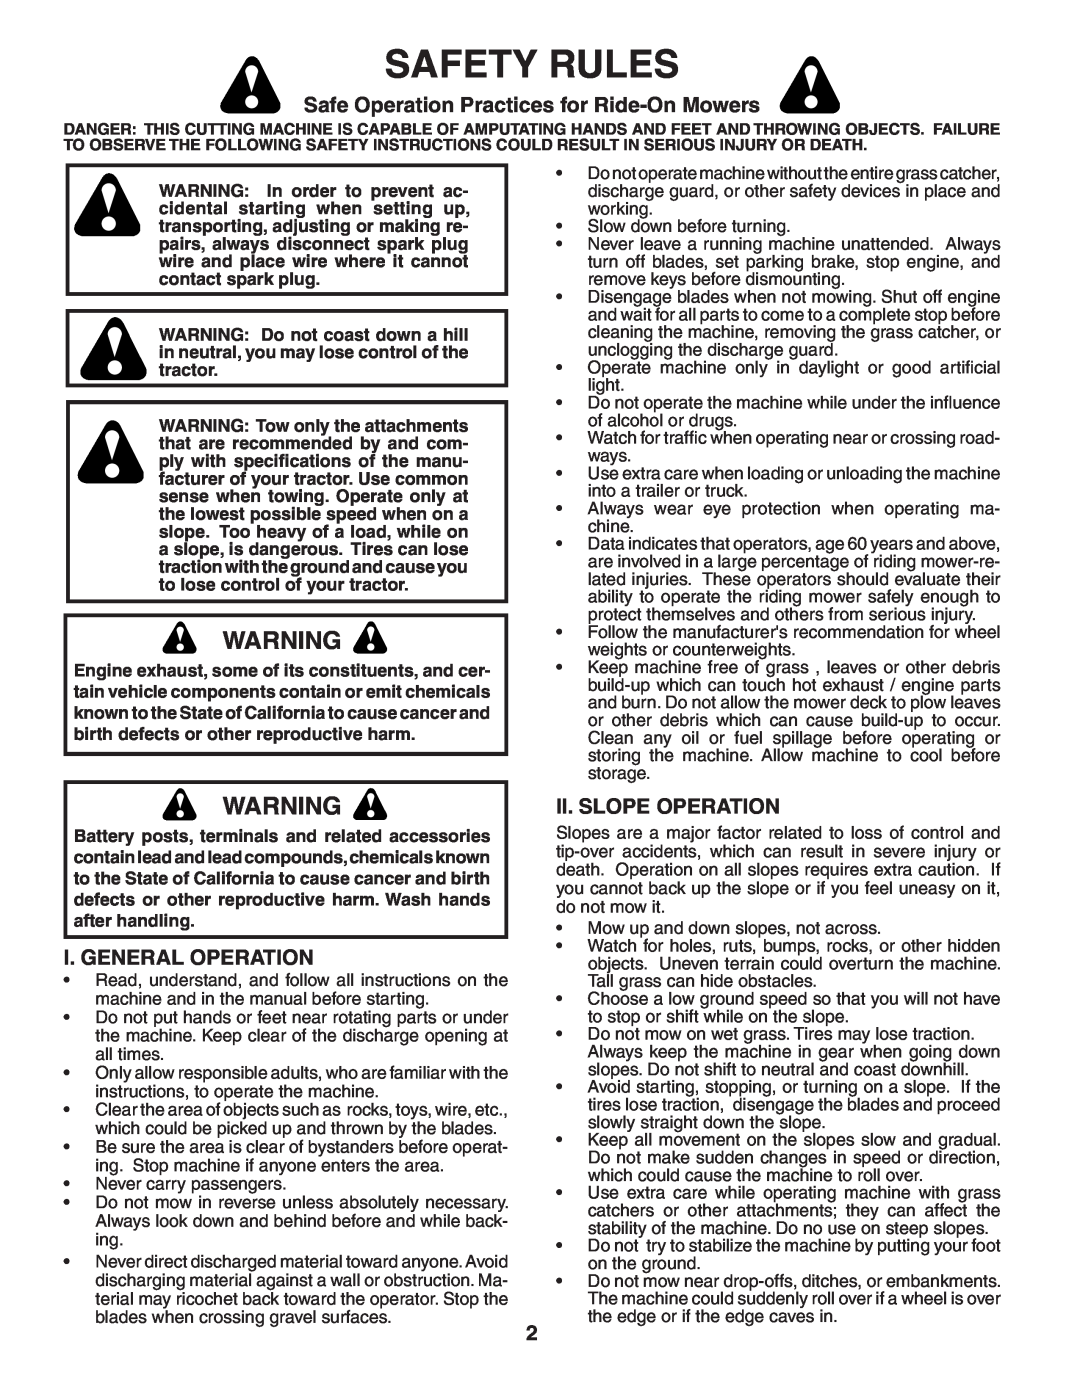 Poulan PB20H42YT manual Safety Rules, Safe Operation Practices for Ride-OnMowers, I. General Operation, Ii. Slope Operation 